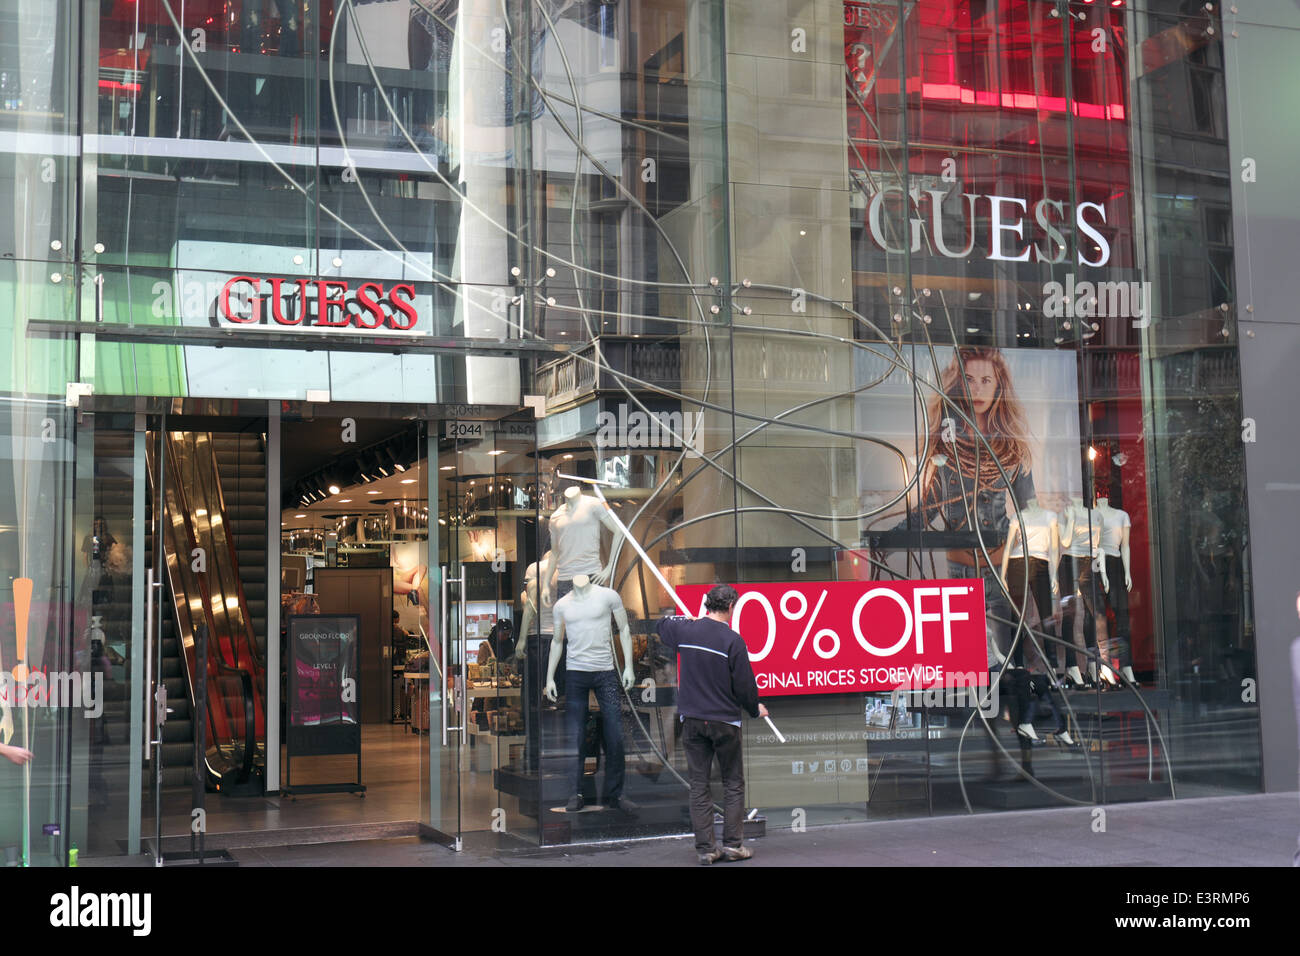 man cleaning the windows of the Guess retail store in Sydney's pitt street, australia Stock Photo - Alamy